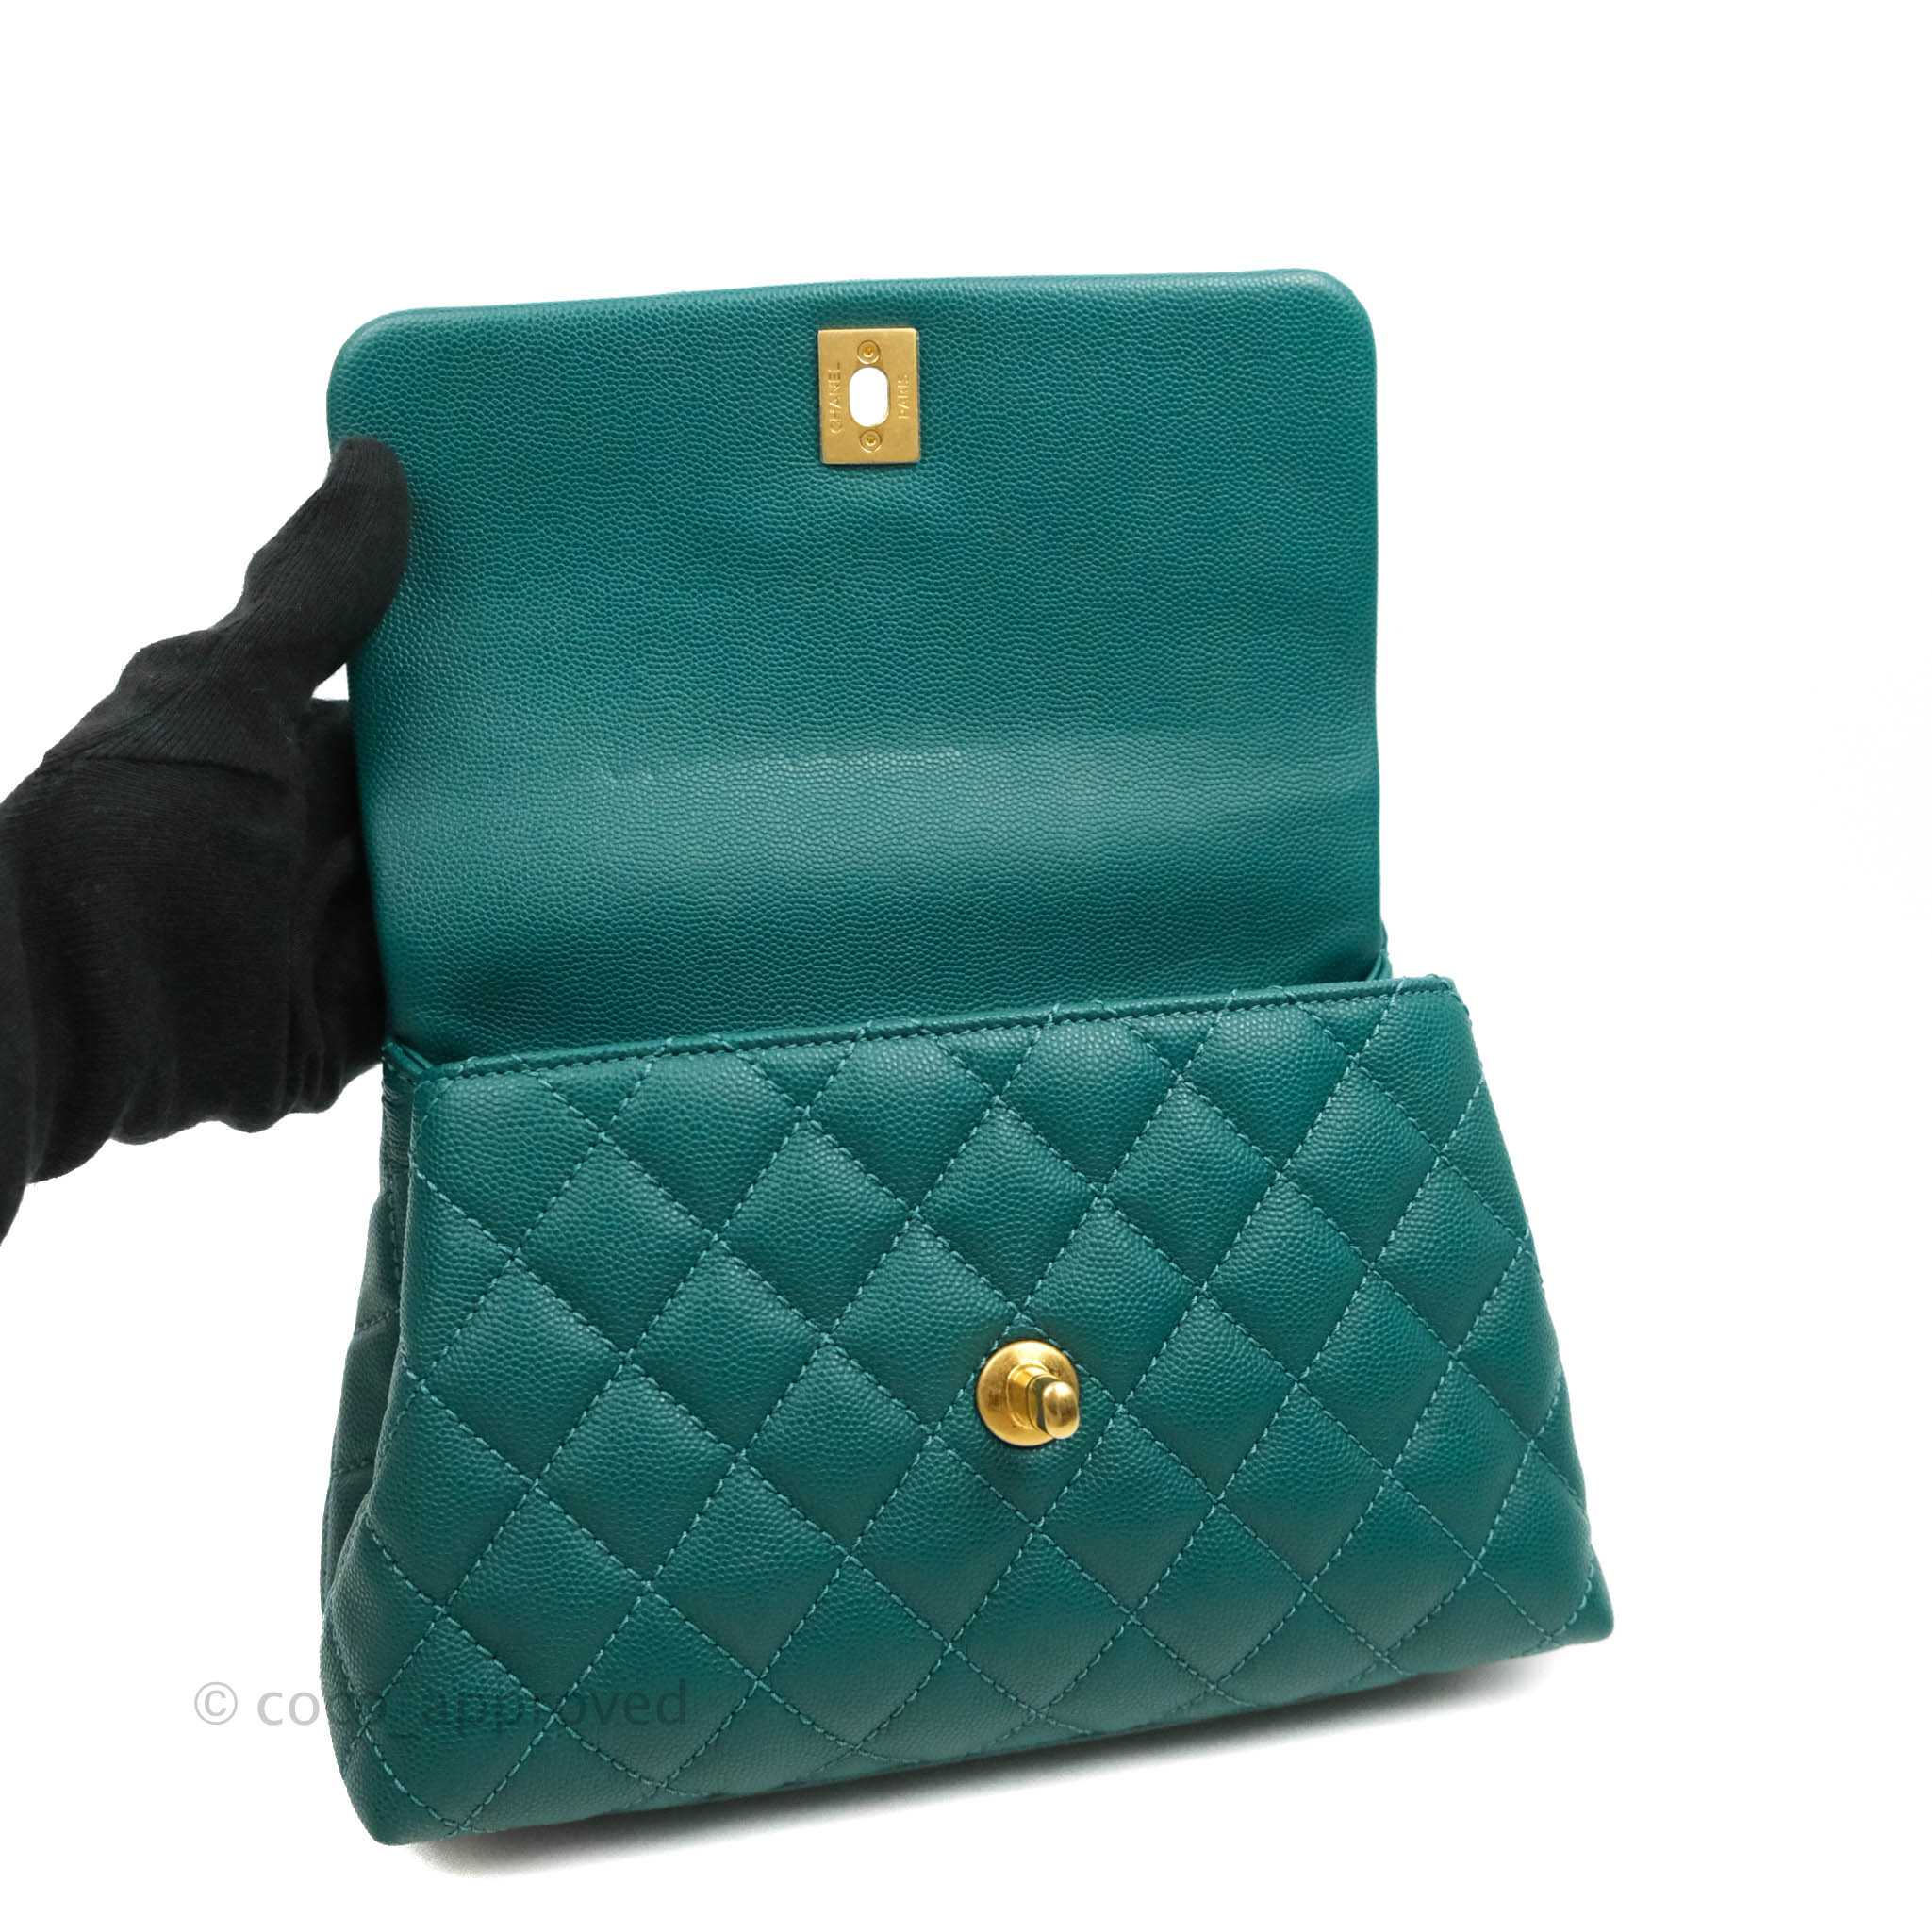 Chanel Small Quilted Coco Handle Teal Green Caviar Gold Hardware